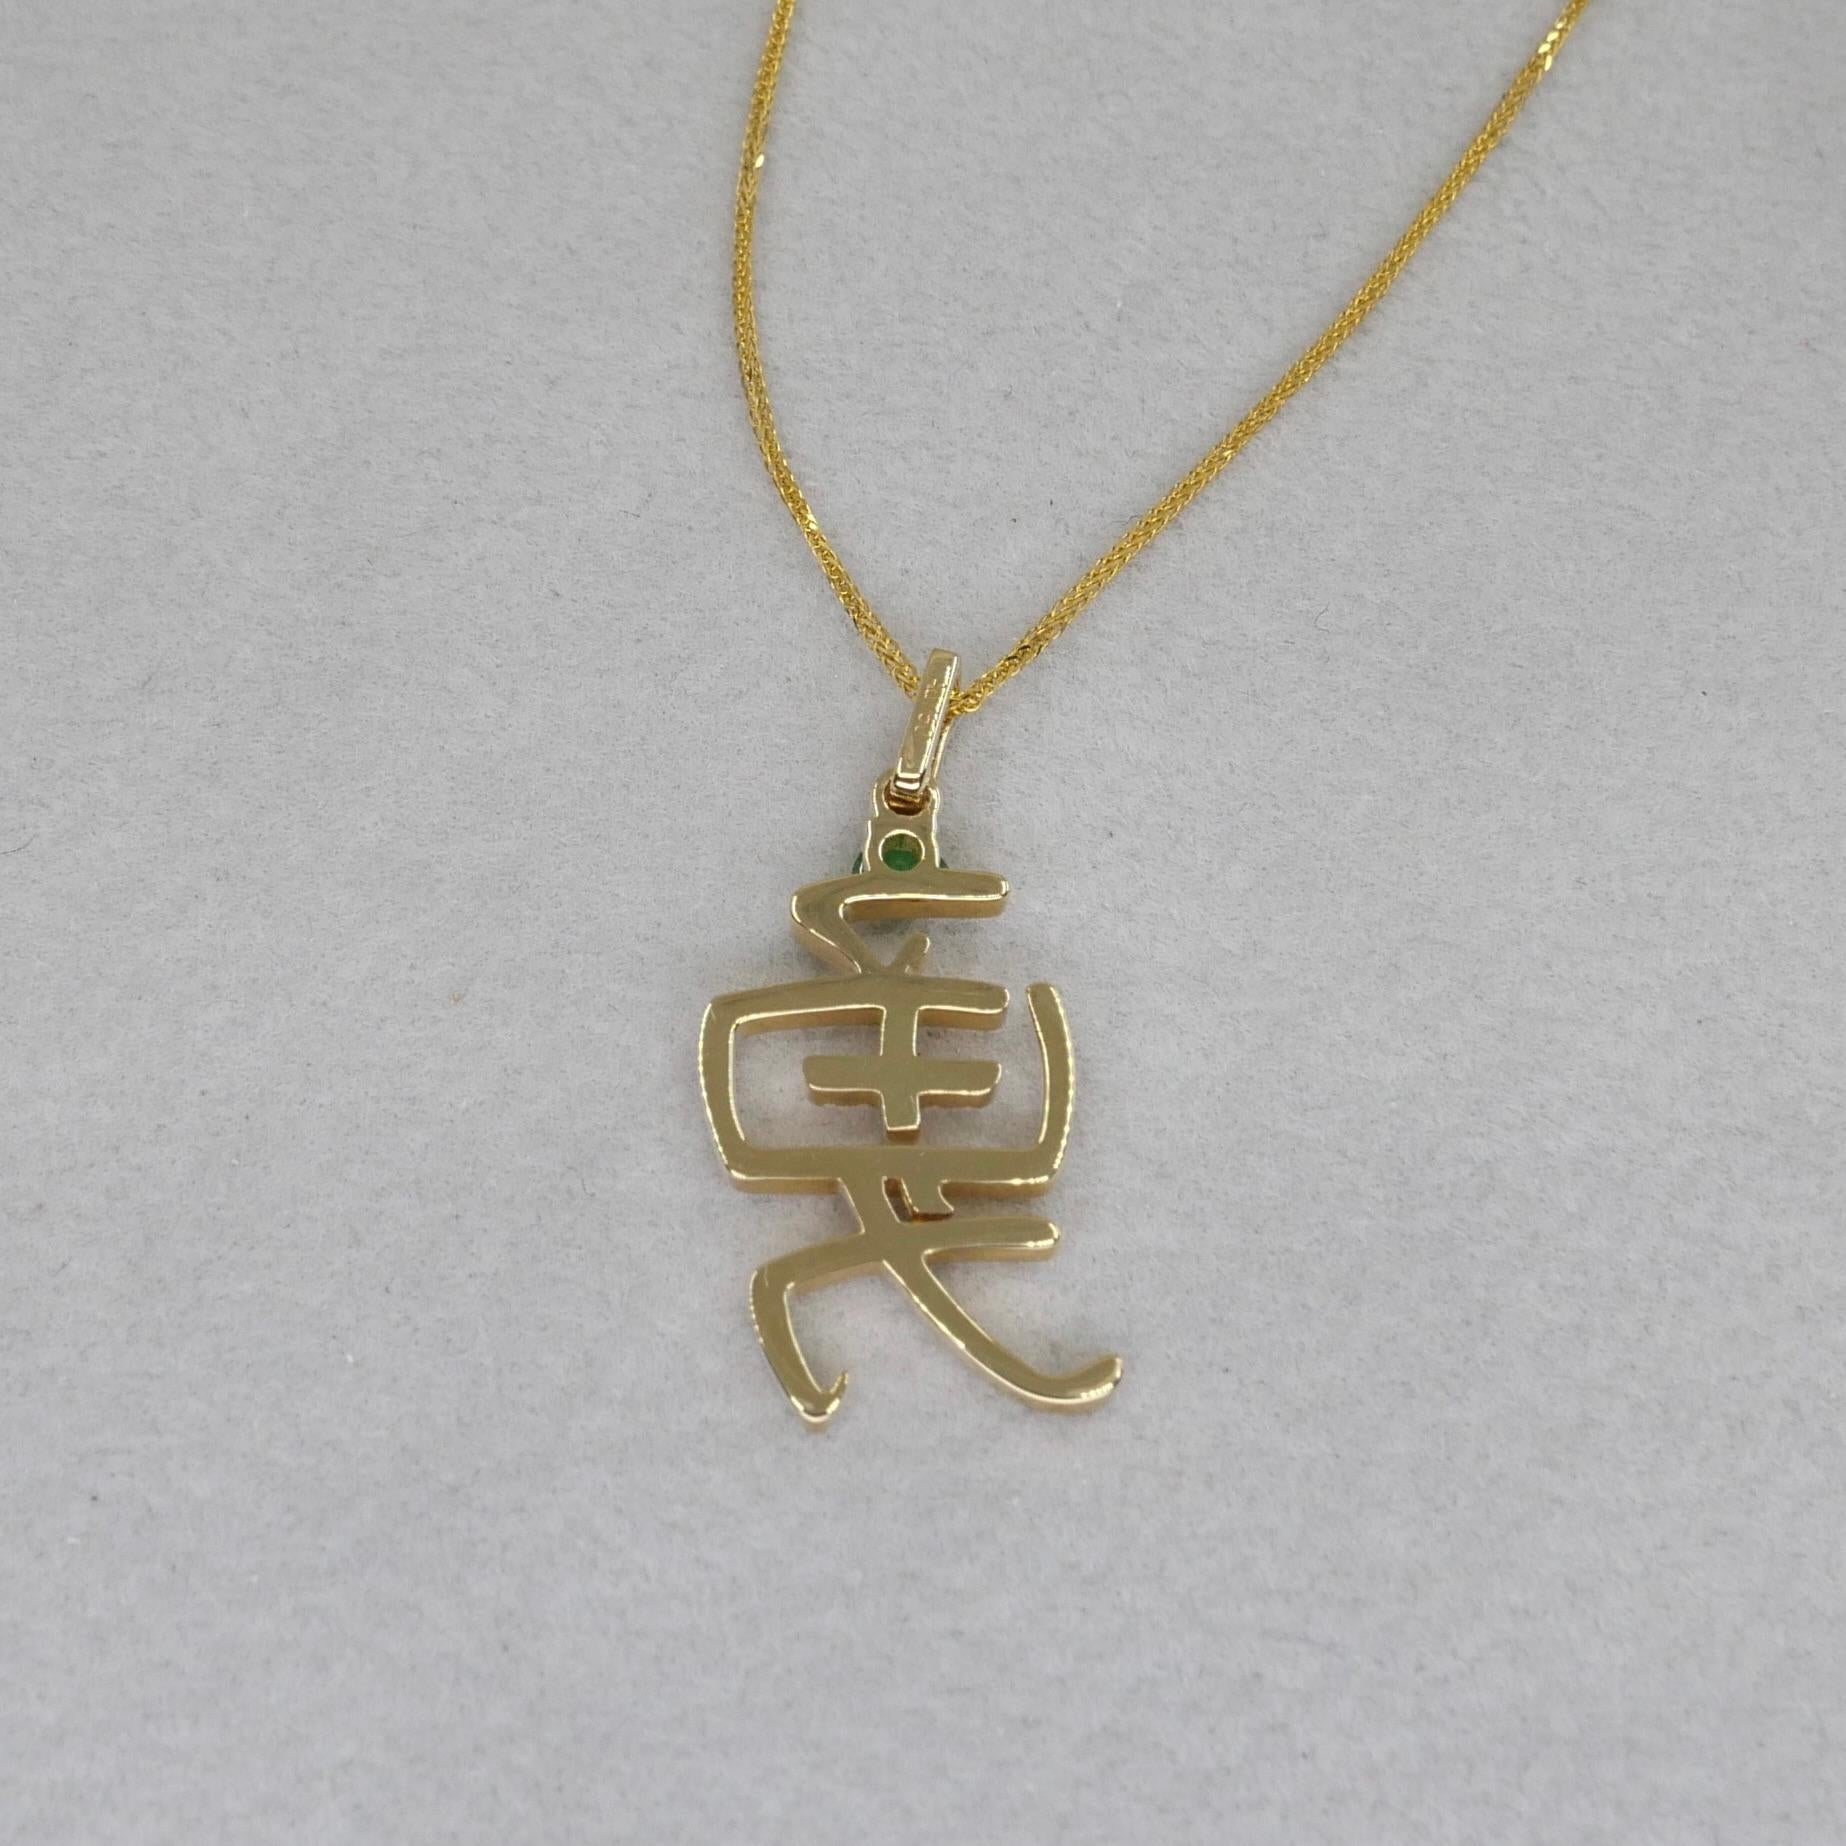  Certified Jade & Diamond Courage Pendant, 18k Yellow Gold. Imperial Green. For Sale 6